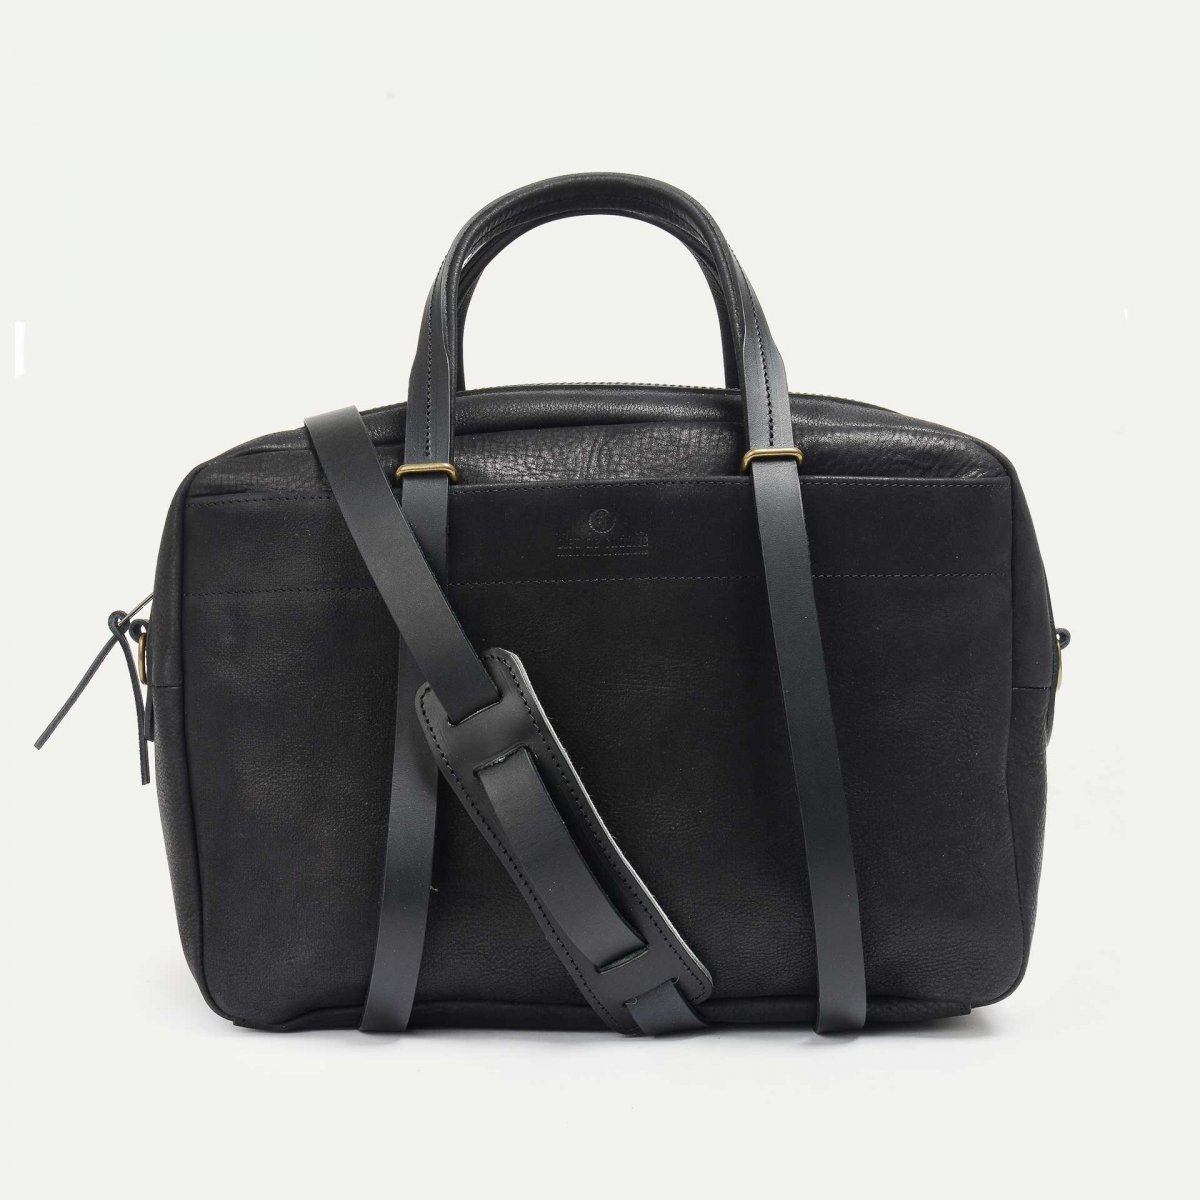 Report Business bag - Charcoal black / Waxed Leather (image n°1)